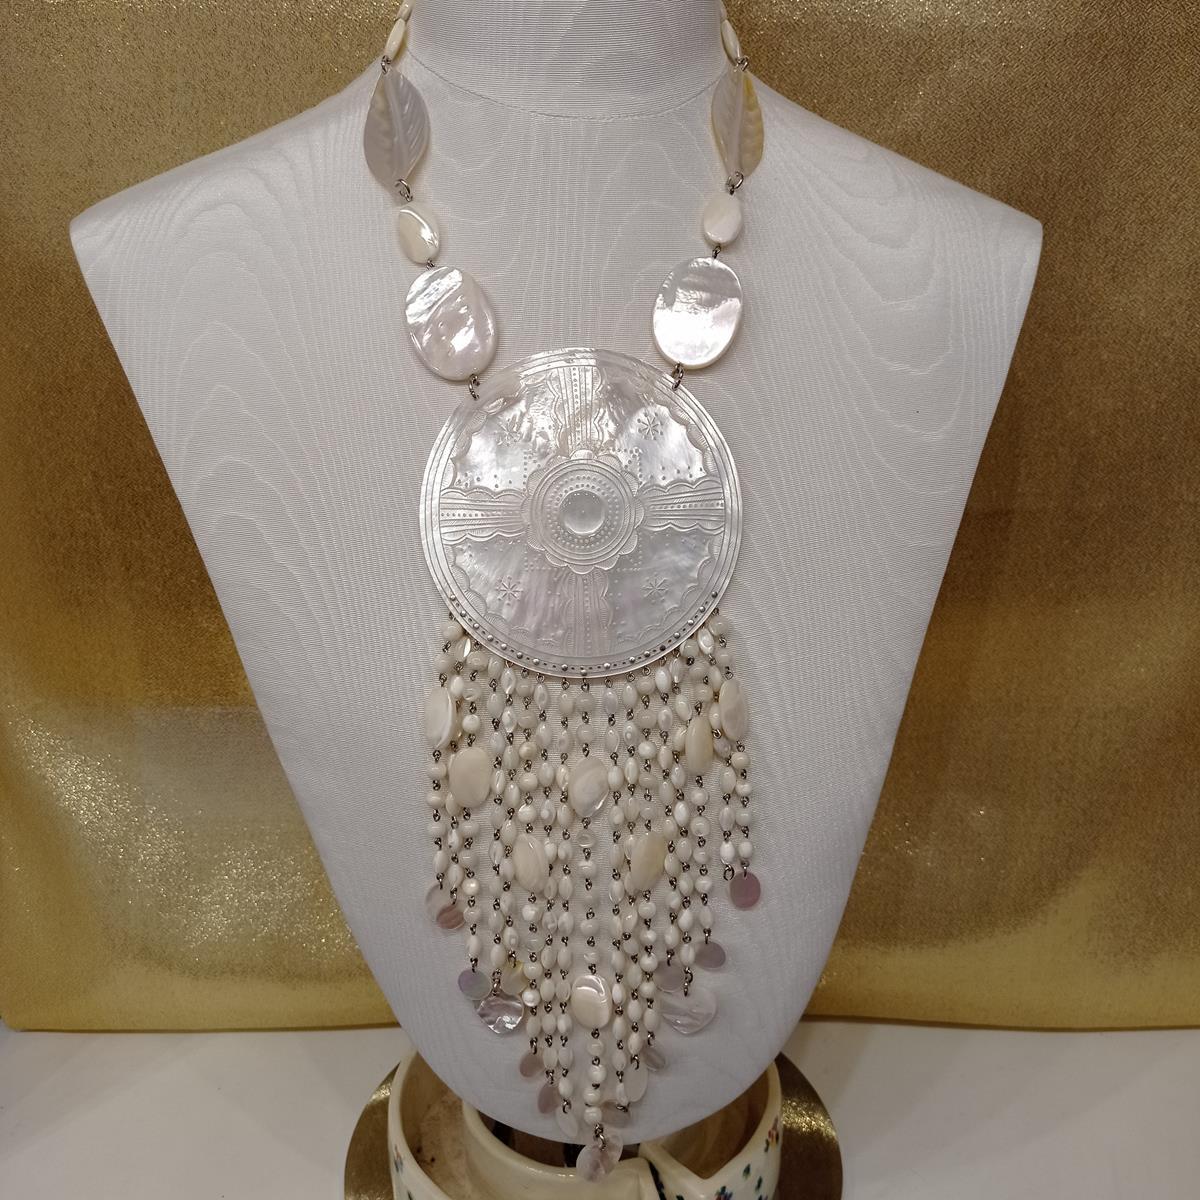 Fantastic masterpiece by Carlo Zini
One of the world greatest bijoux designers
Maxi necklace
Mother of pearl big central element and drops
Non allergenic rhodium
100% Artisanal work made in Milano
Worldwide express shipping included in the price !